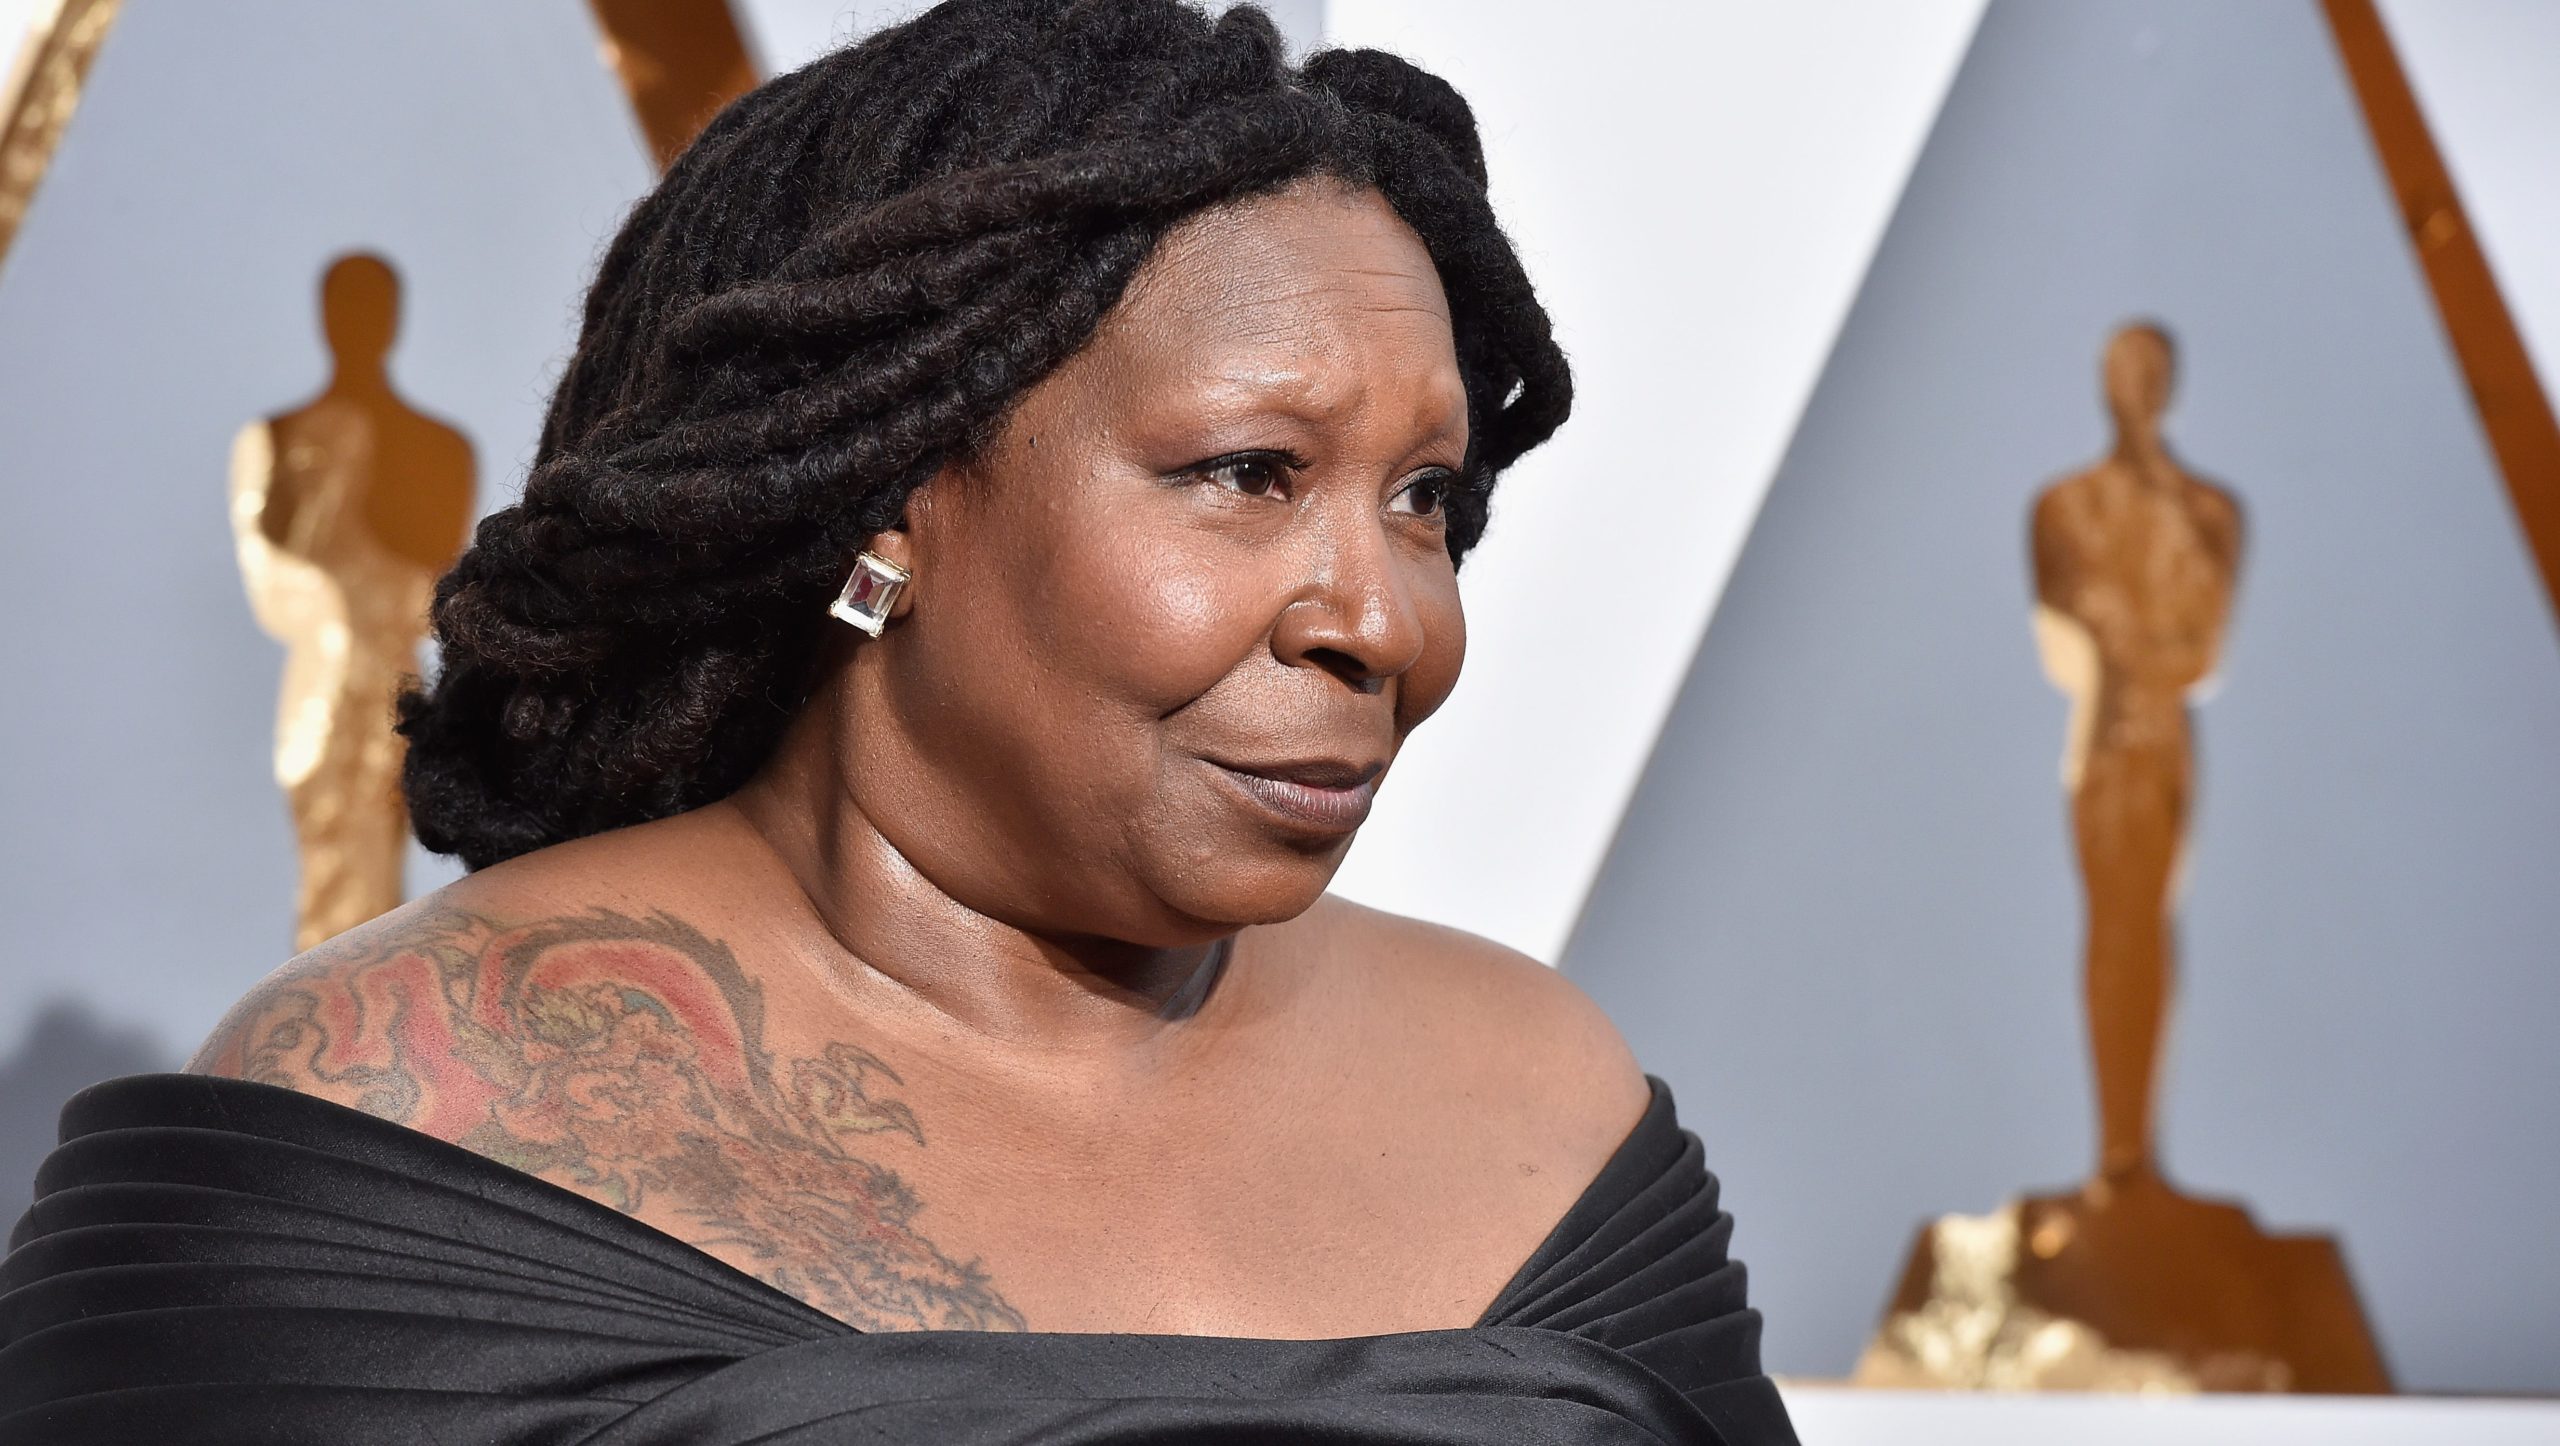 Whoopi Goldberg The View Host With 4 Year Contract Deal to Stay On Talk Show!